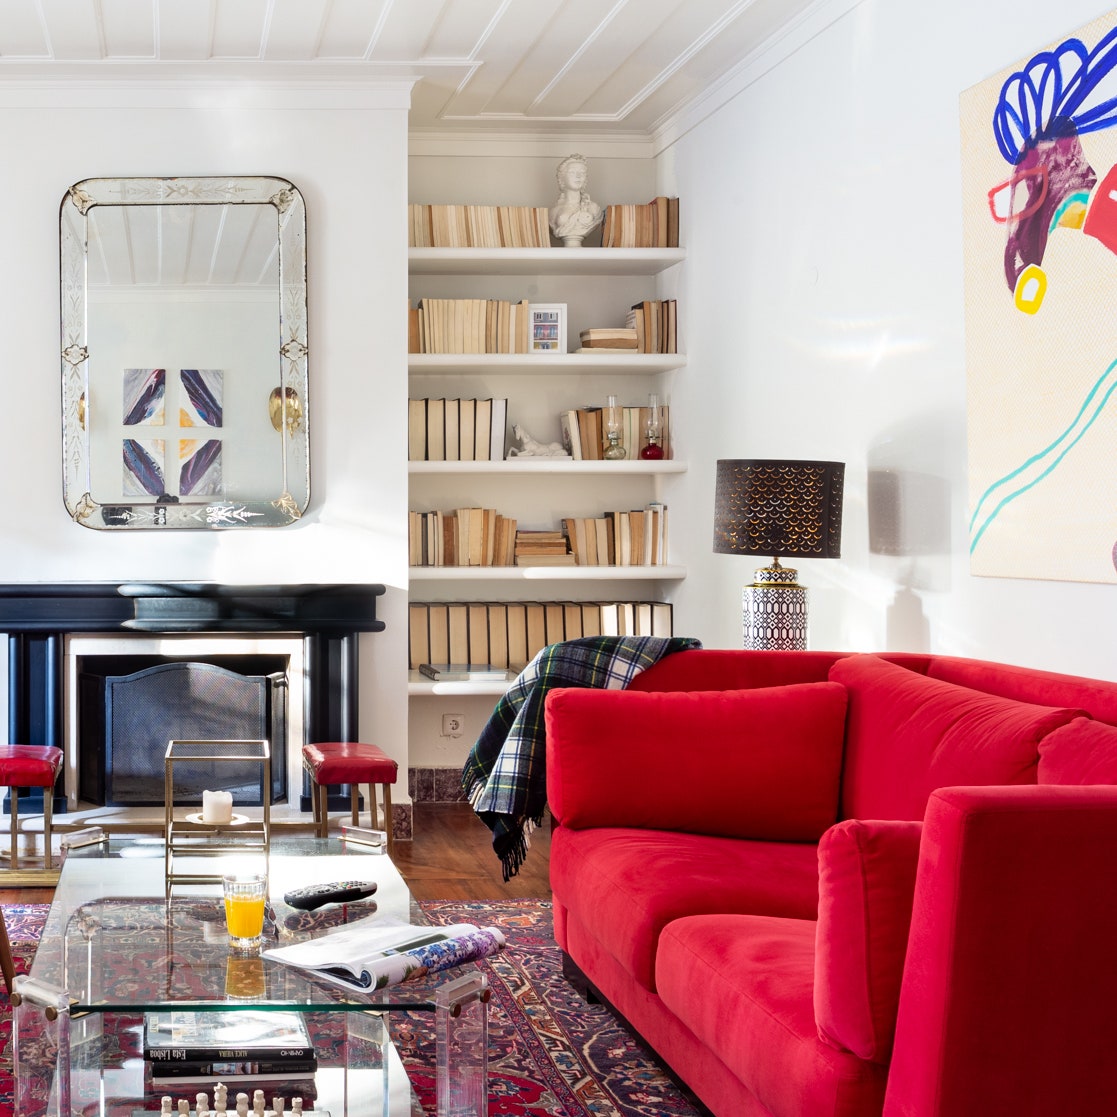 My Week-Long Home in Lisbon: A Spacious Two-Bedroom With a Leafy Garden and Azulejo Tiles